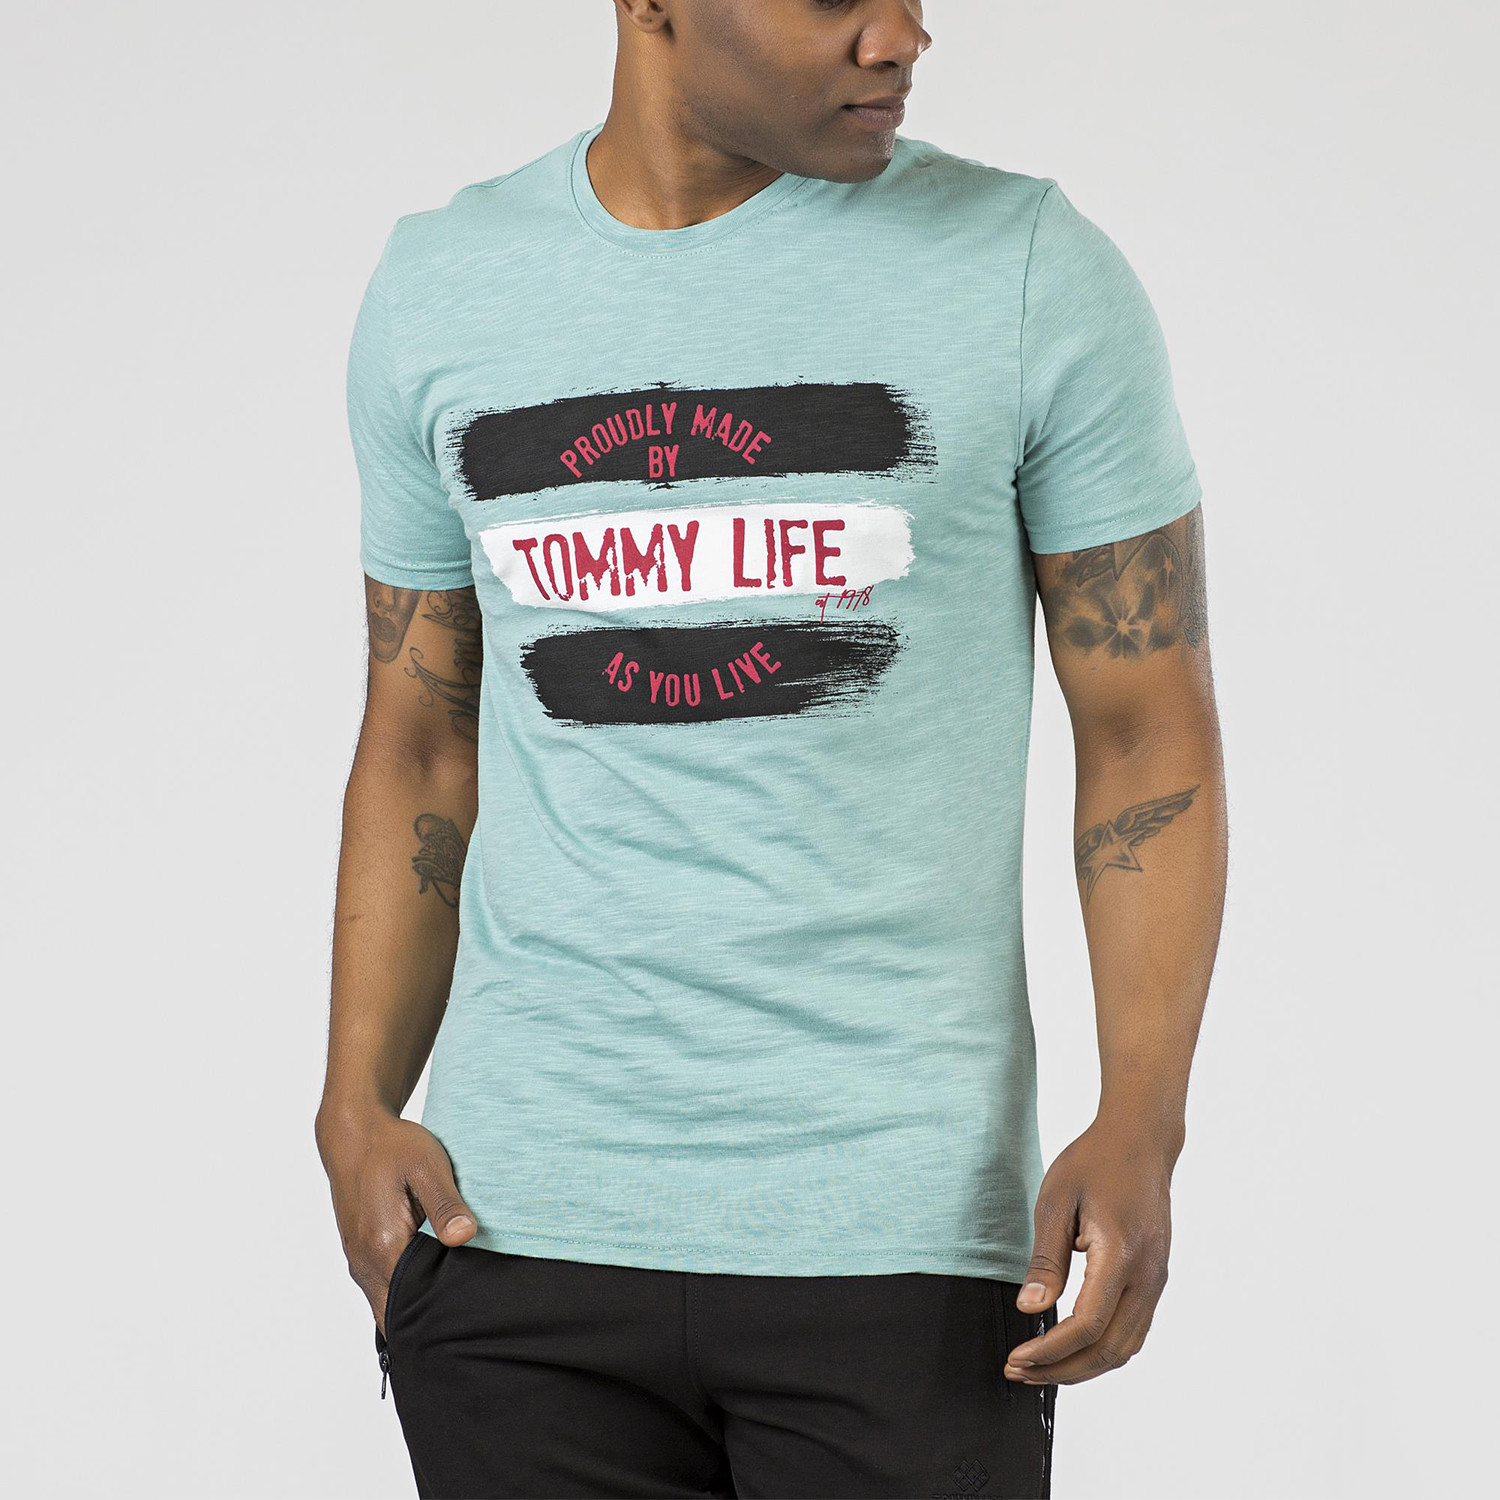 tommy life t shirt